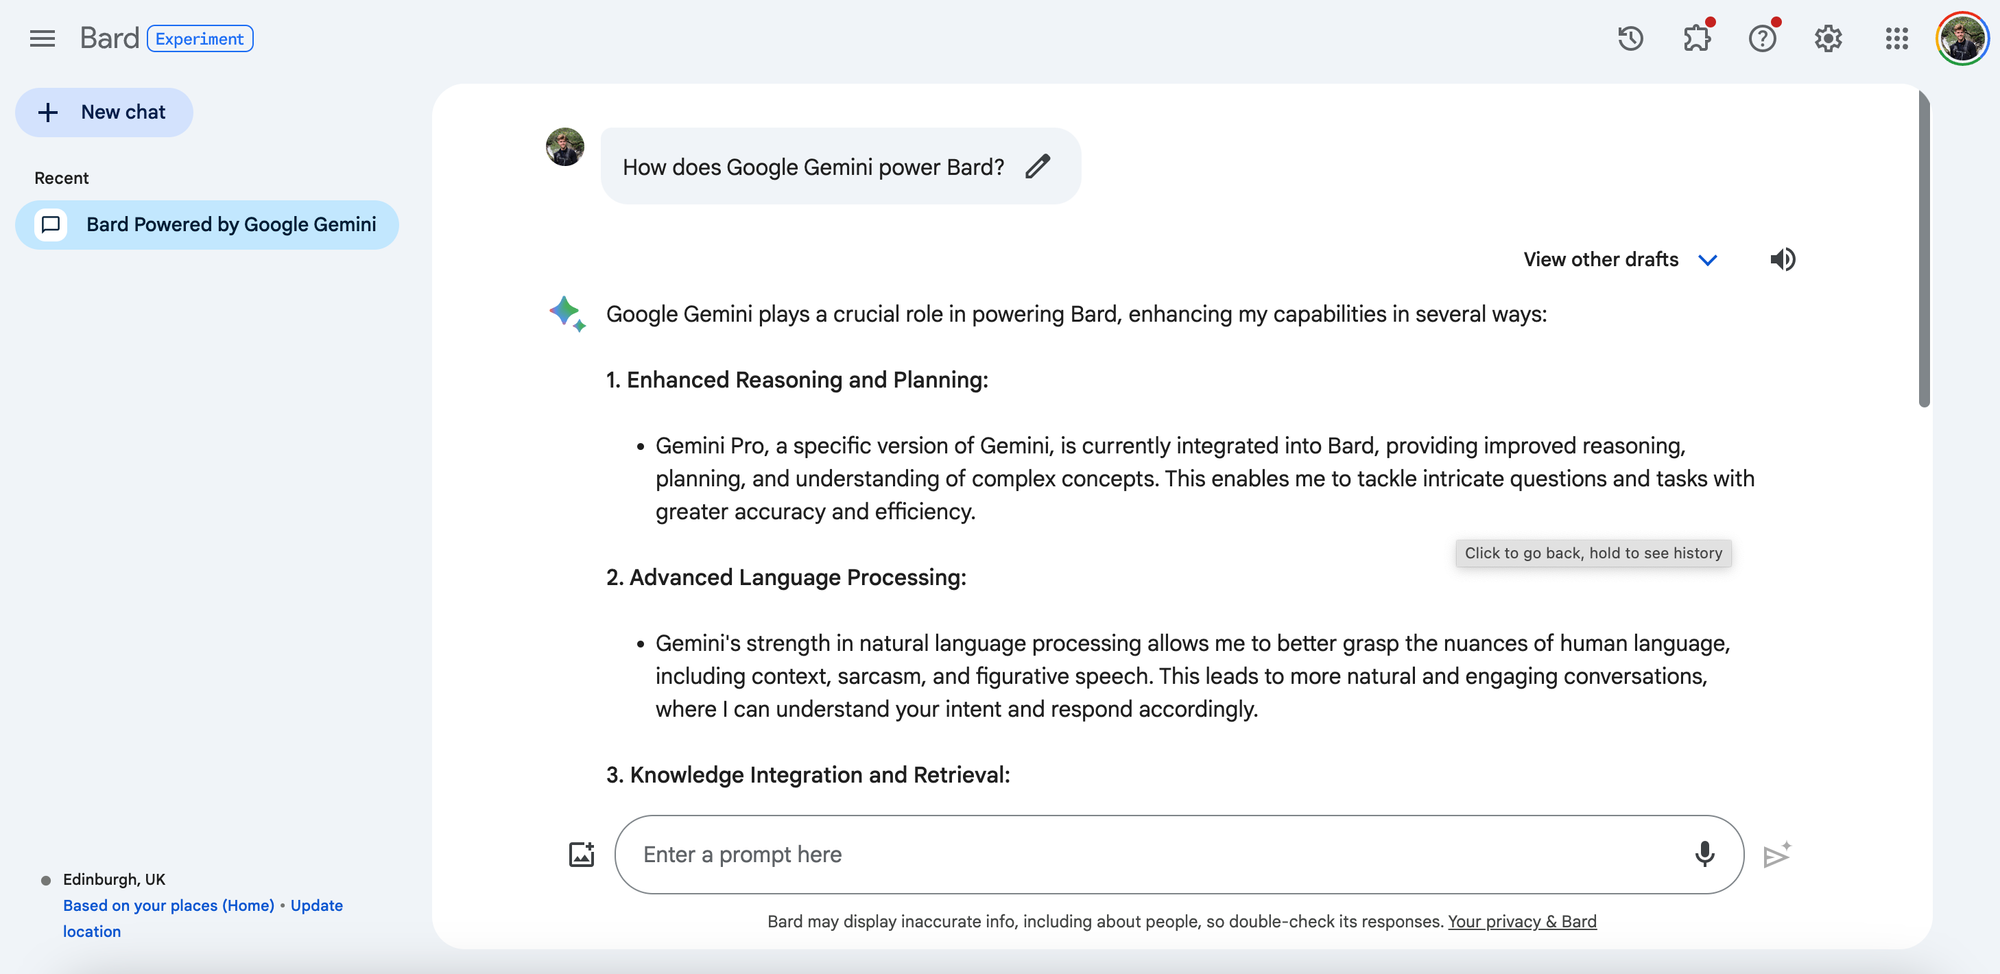 What marketers need to know about Google’s Gemini